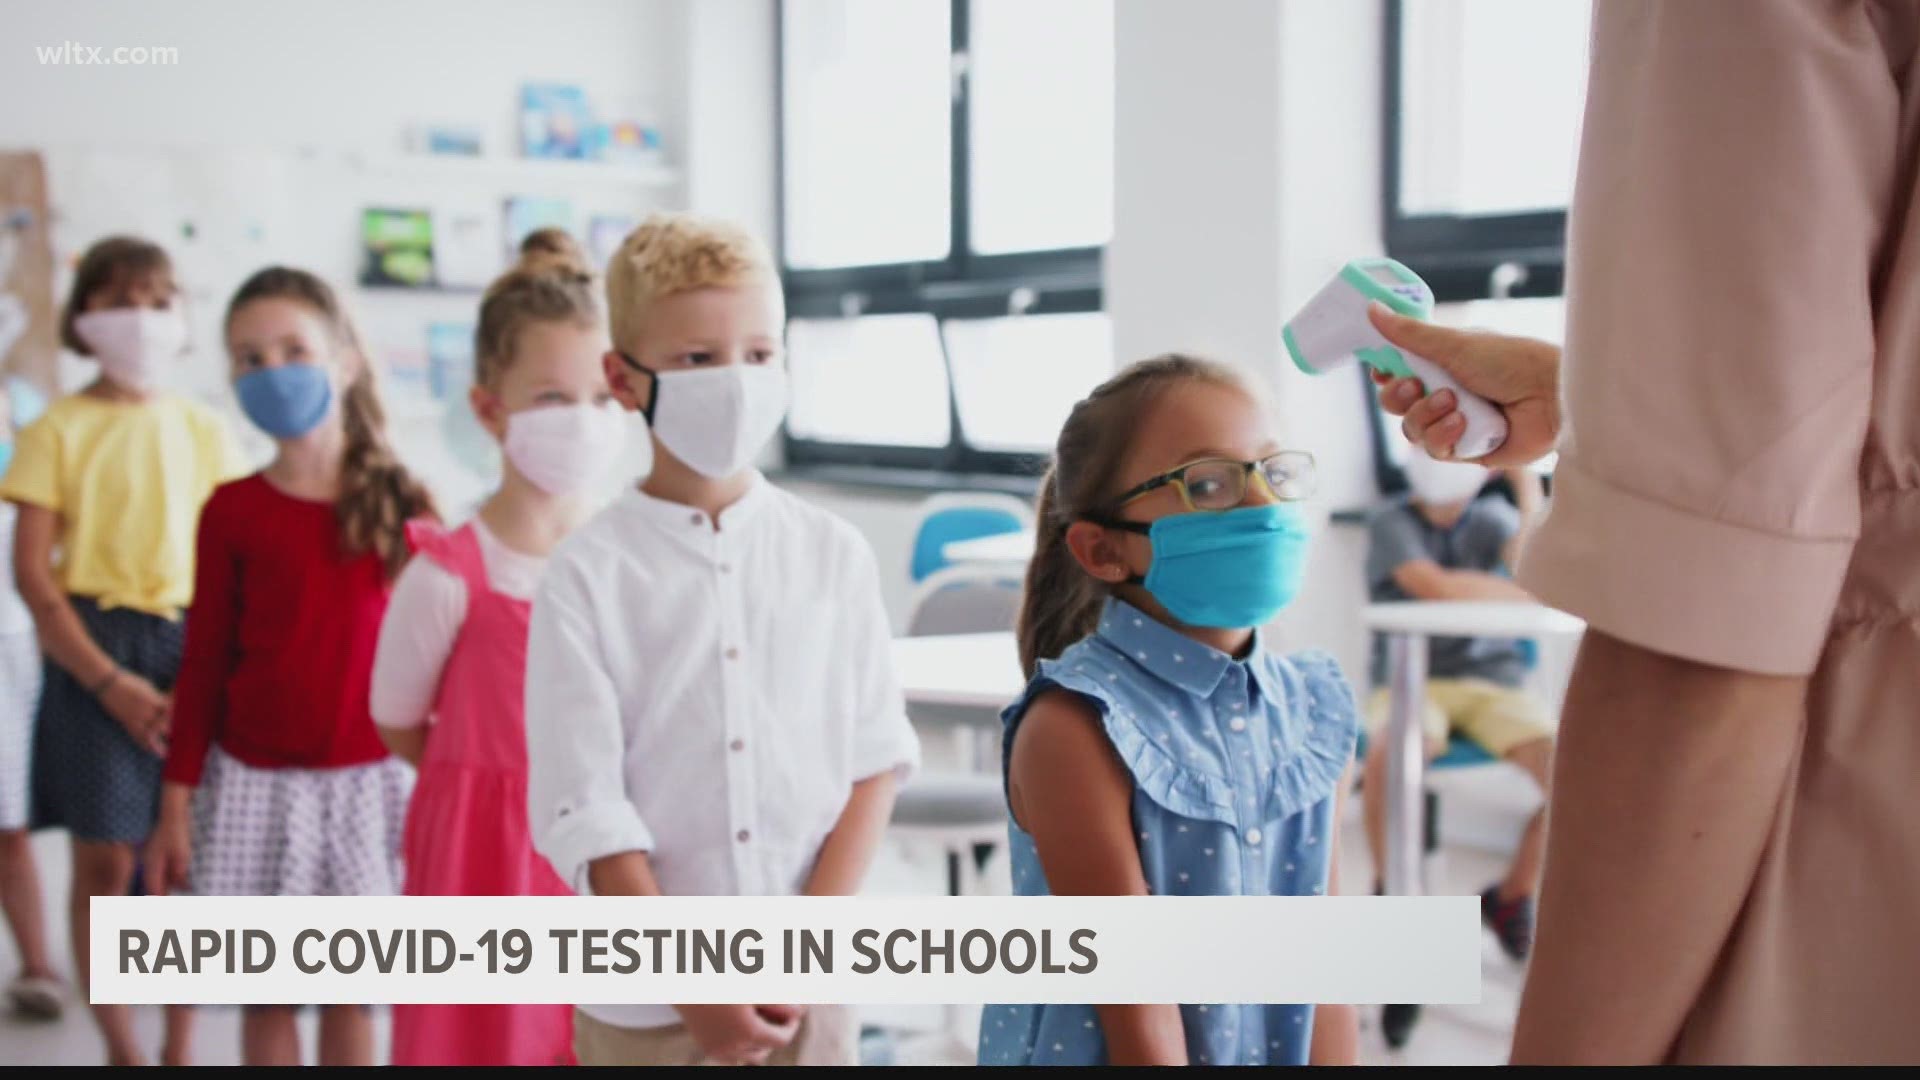 DHEC's plan for testing students at school